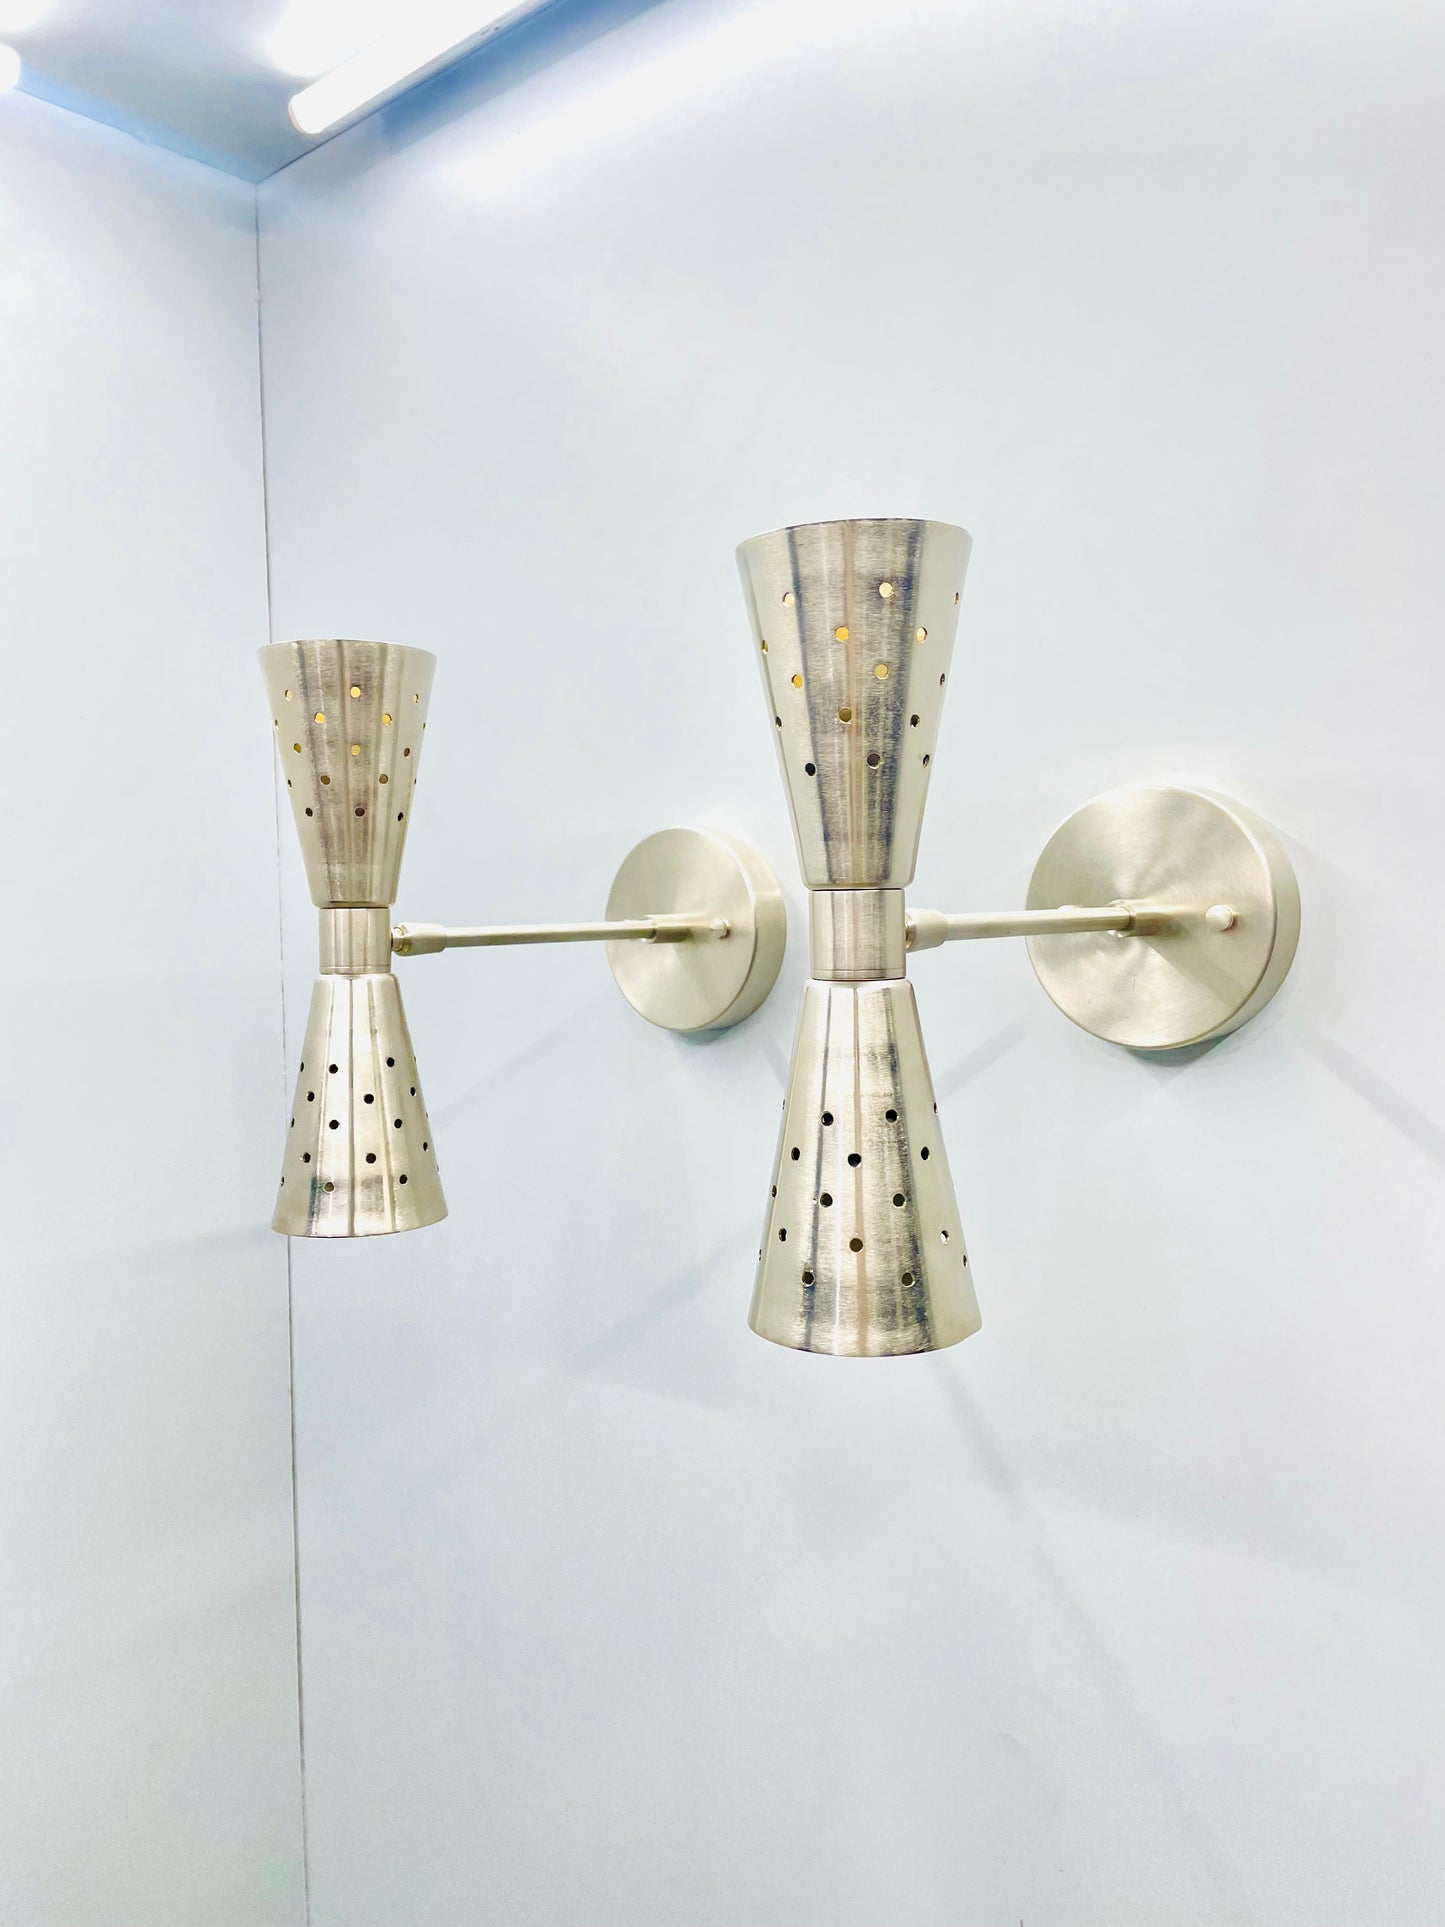 Retro Elegance: Pair of Atomic Style Wall Sconce Lamps